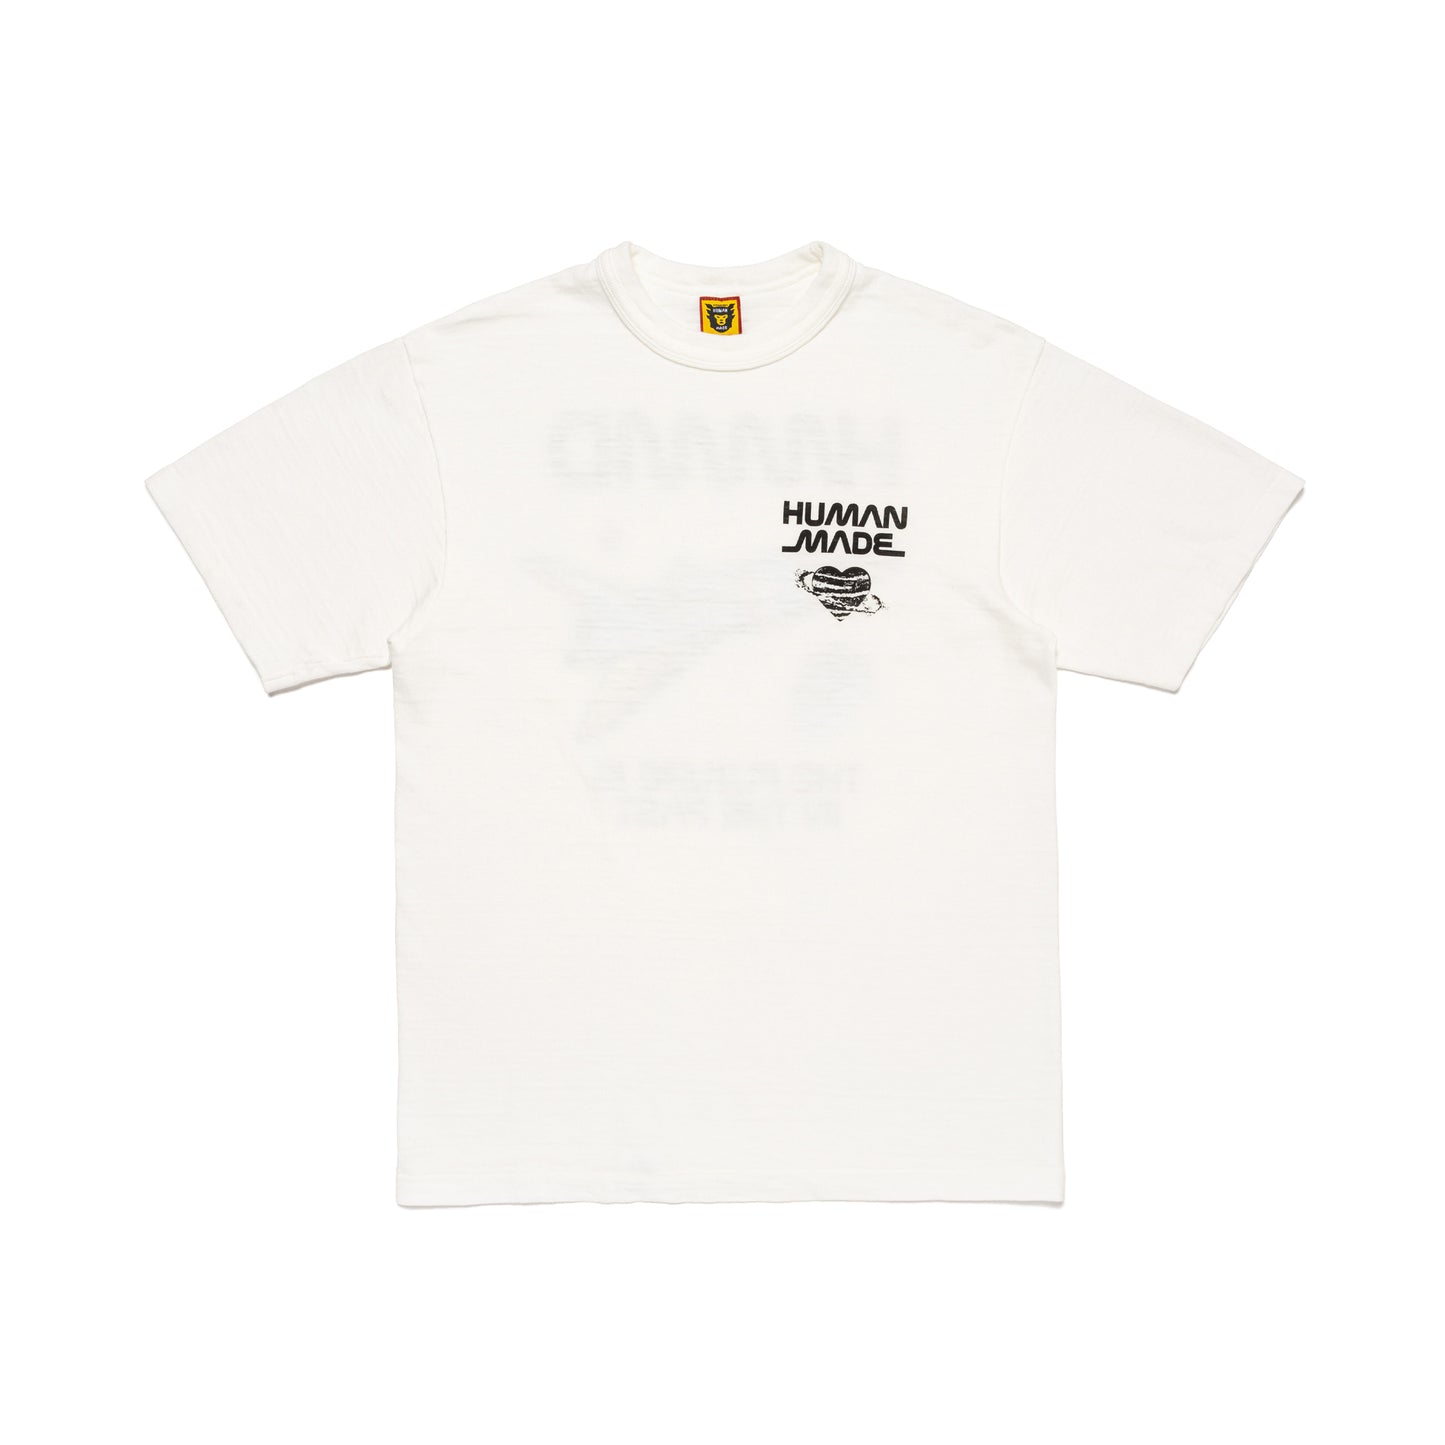 HUMAN MADE GRAPHIC T-SHIRT #11 WH-A